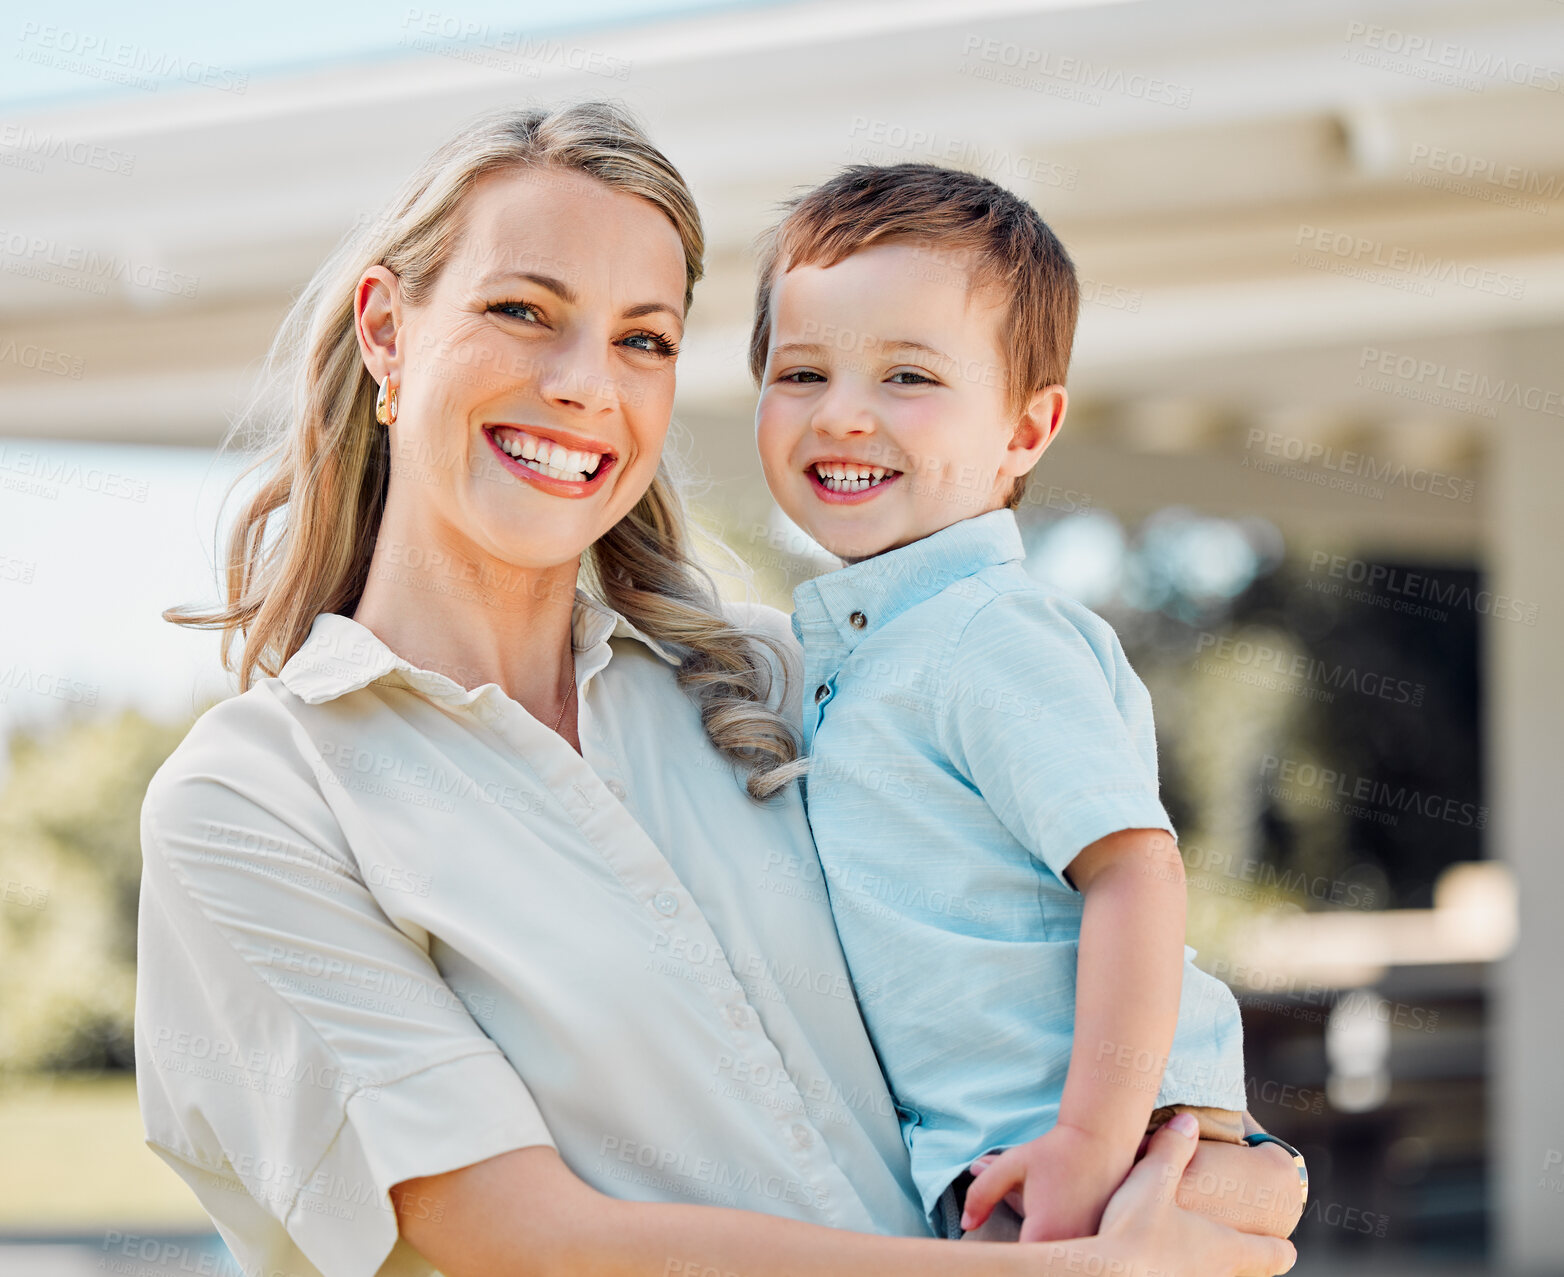 Buy stock photo Portrait of happy caucasian mother holding cheerful son while having fun in the sun outside. Smiling woman carrying carefree boy while bonding in the yard. Loving mom enjoying quality time with kid